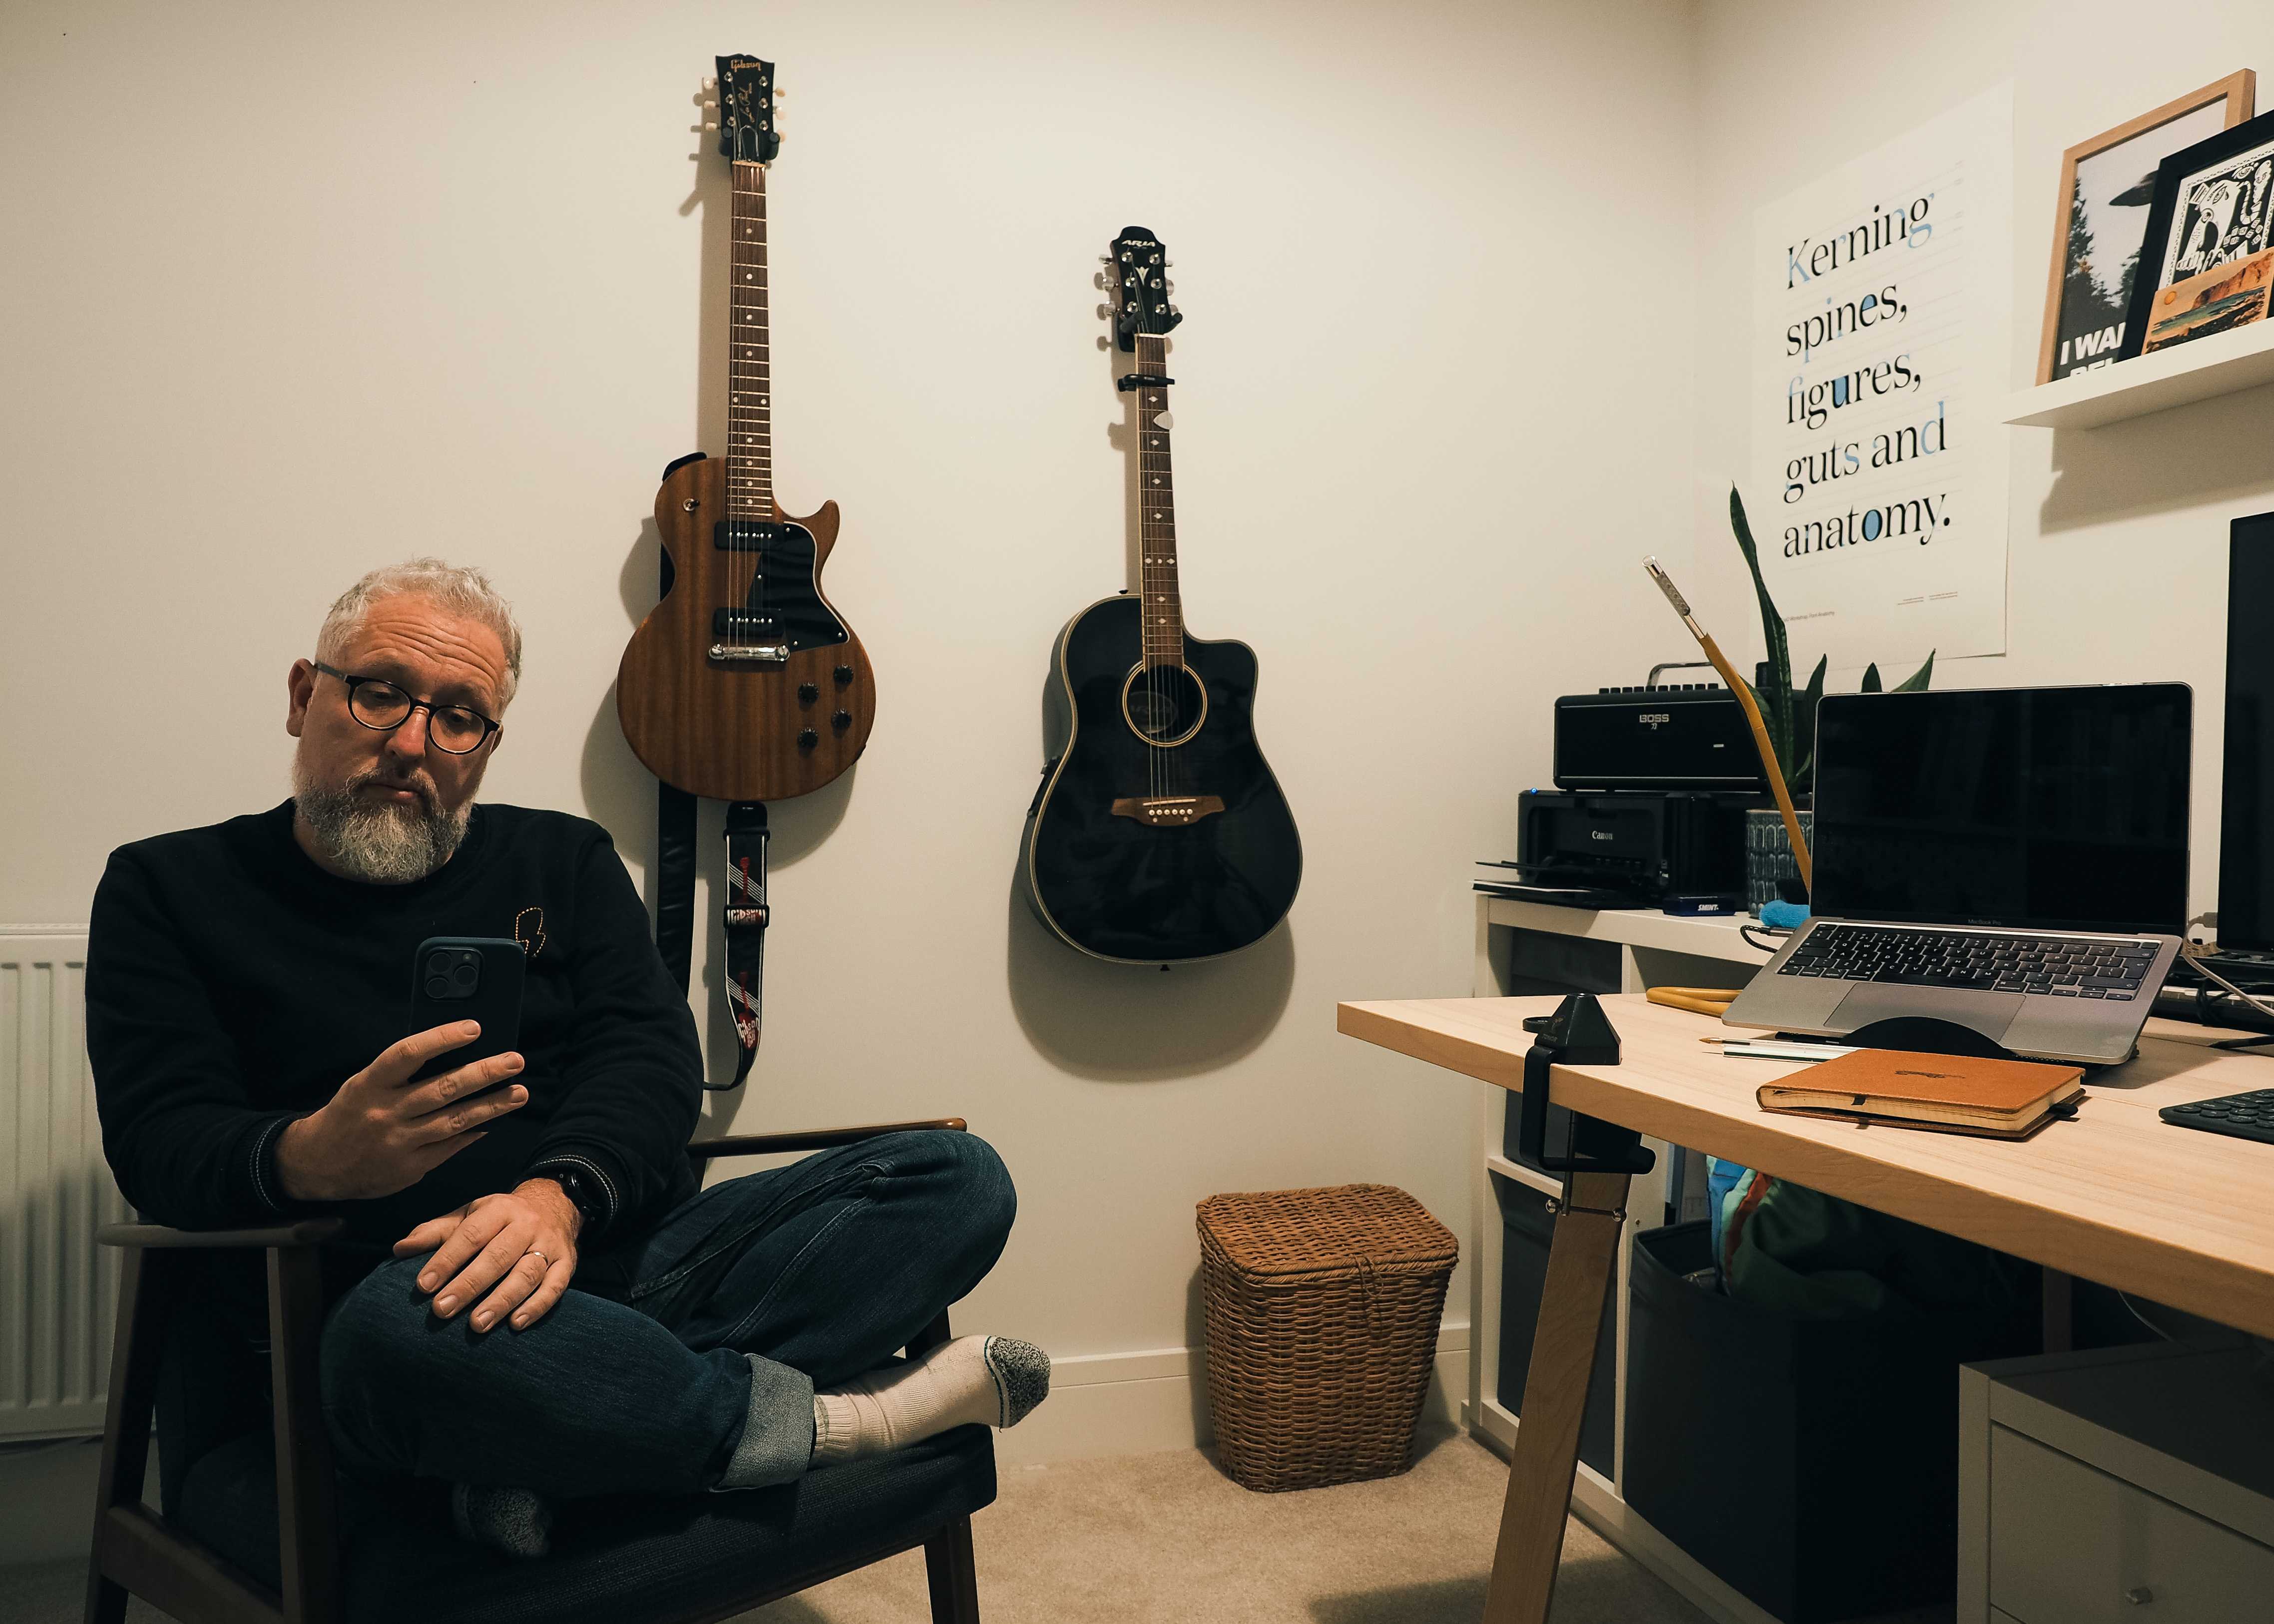 man sits alone in a chair with his phone, he's in his home office surrounded by desk, laptop & guitars